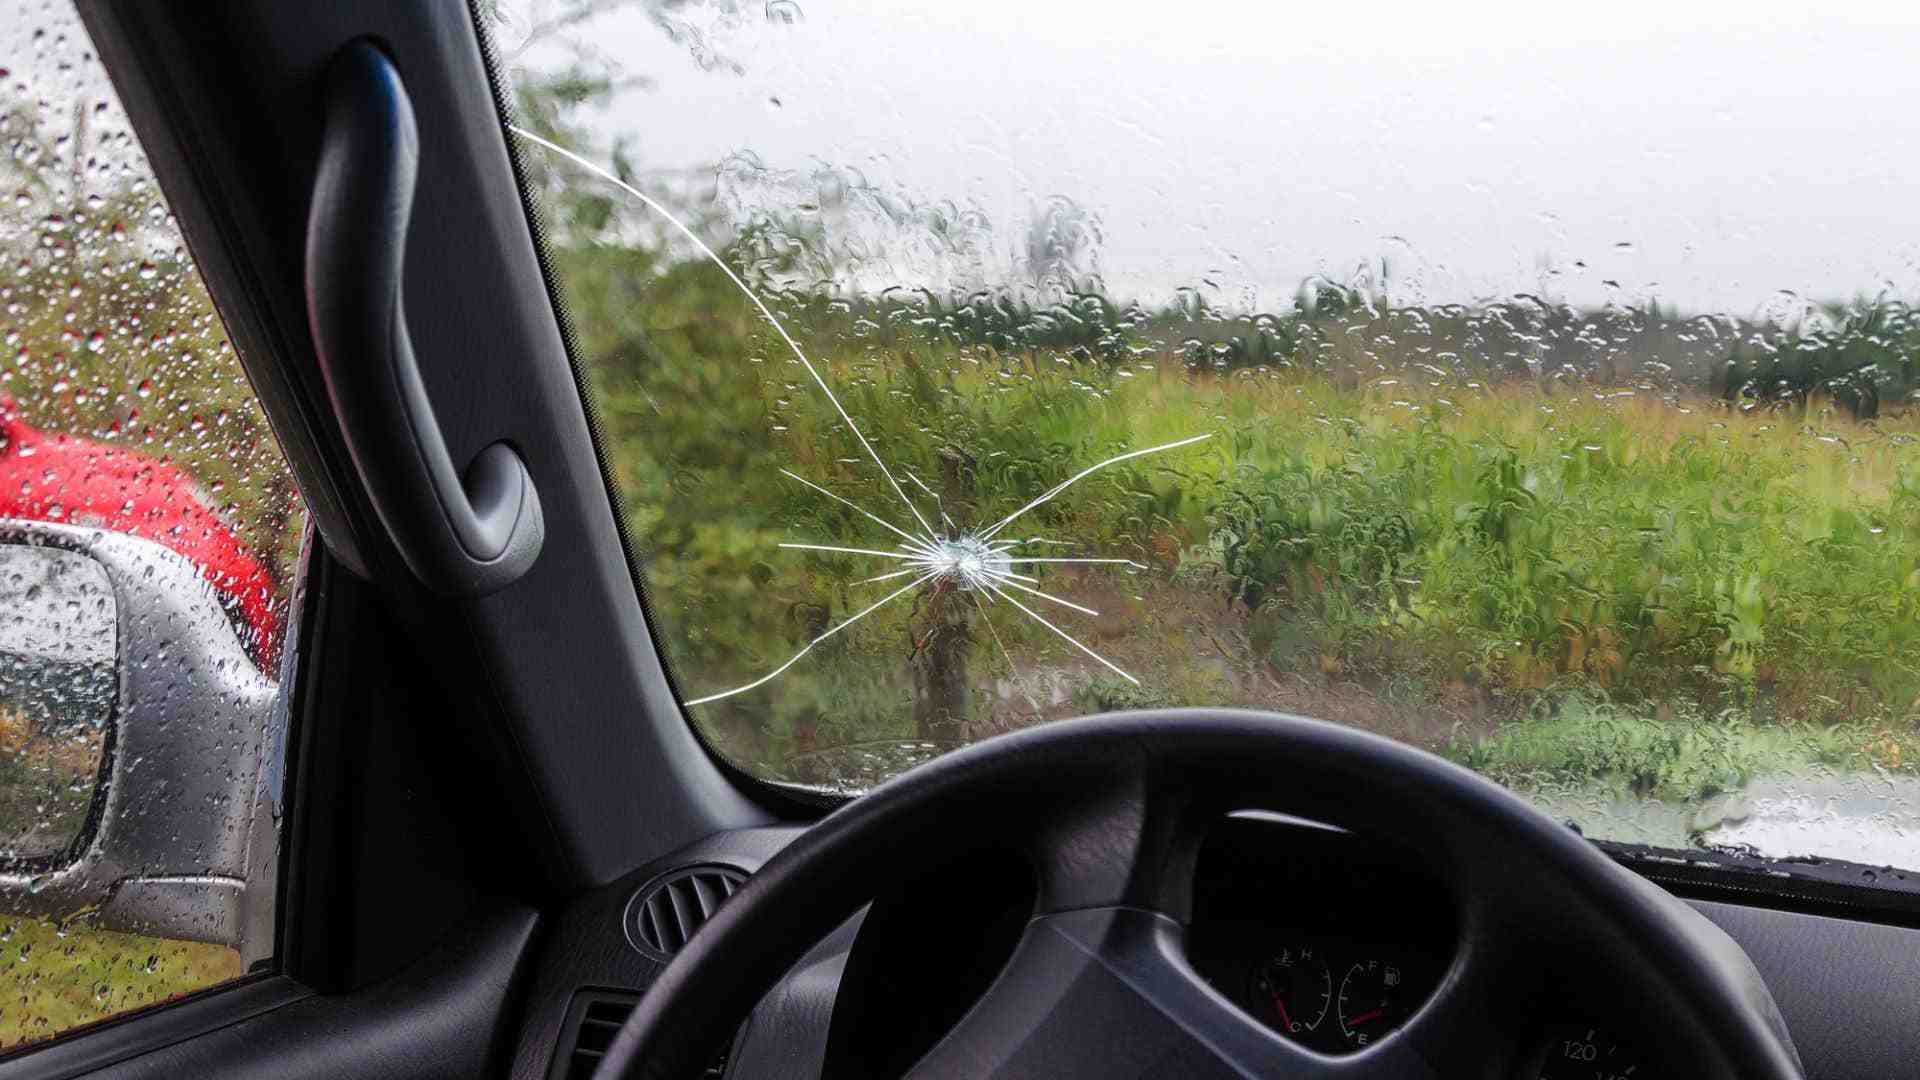 Does your insurance go up if a rock hits your windshield?